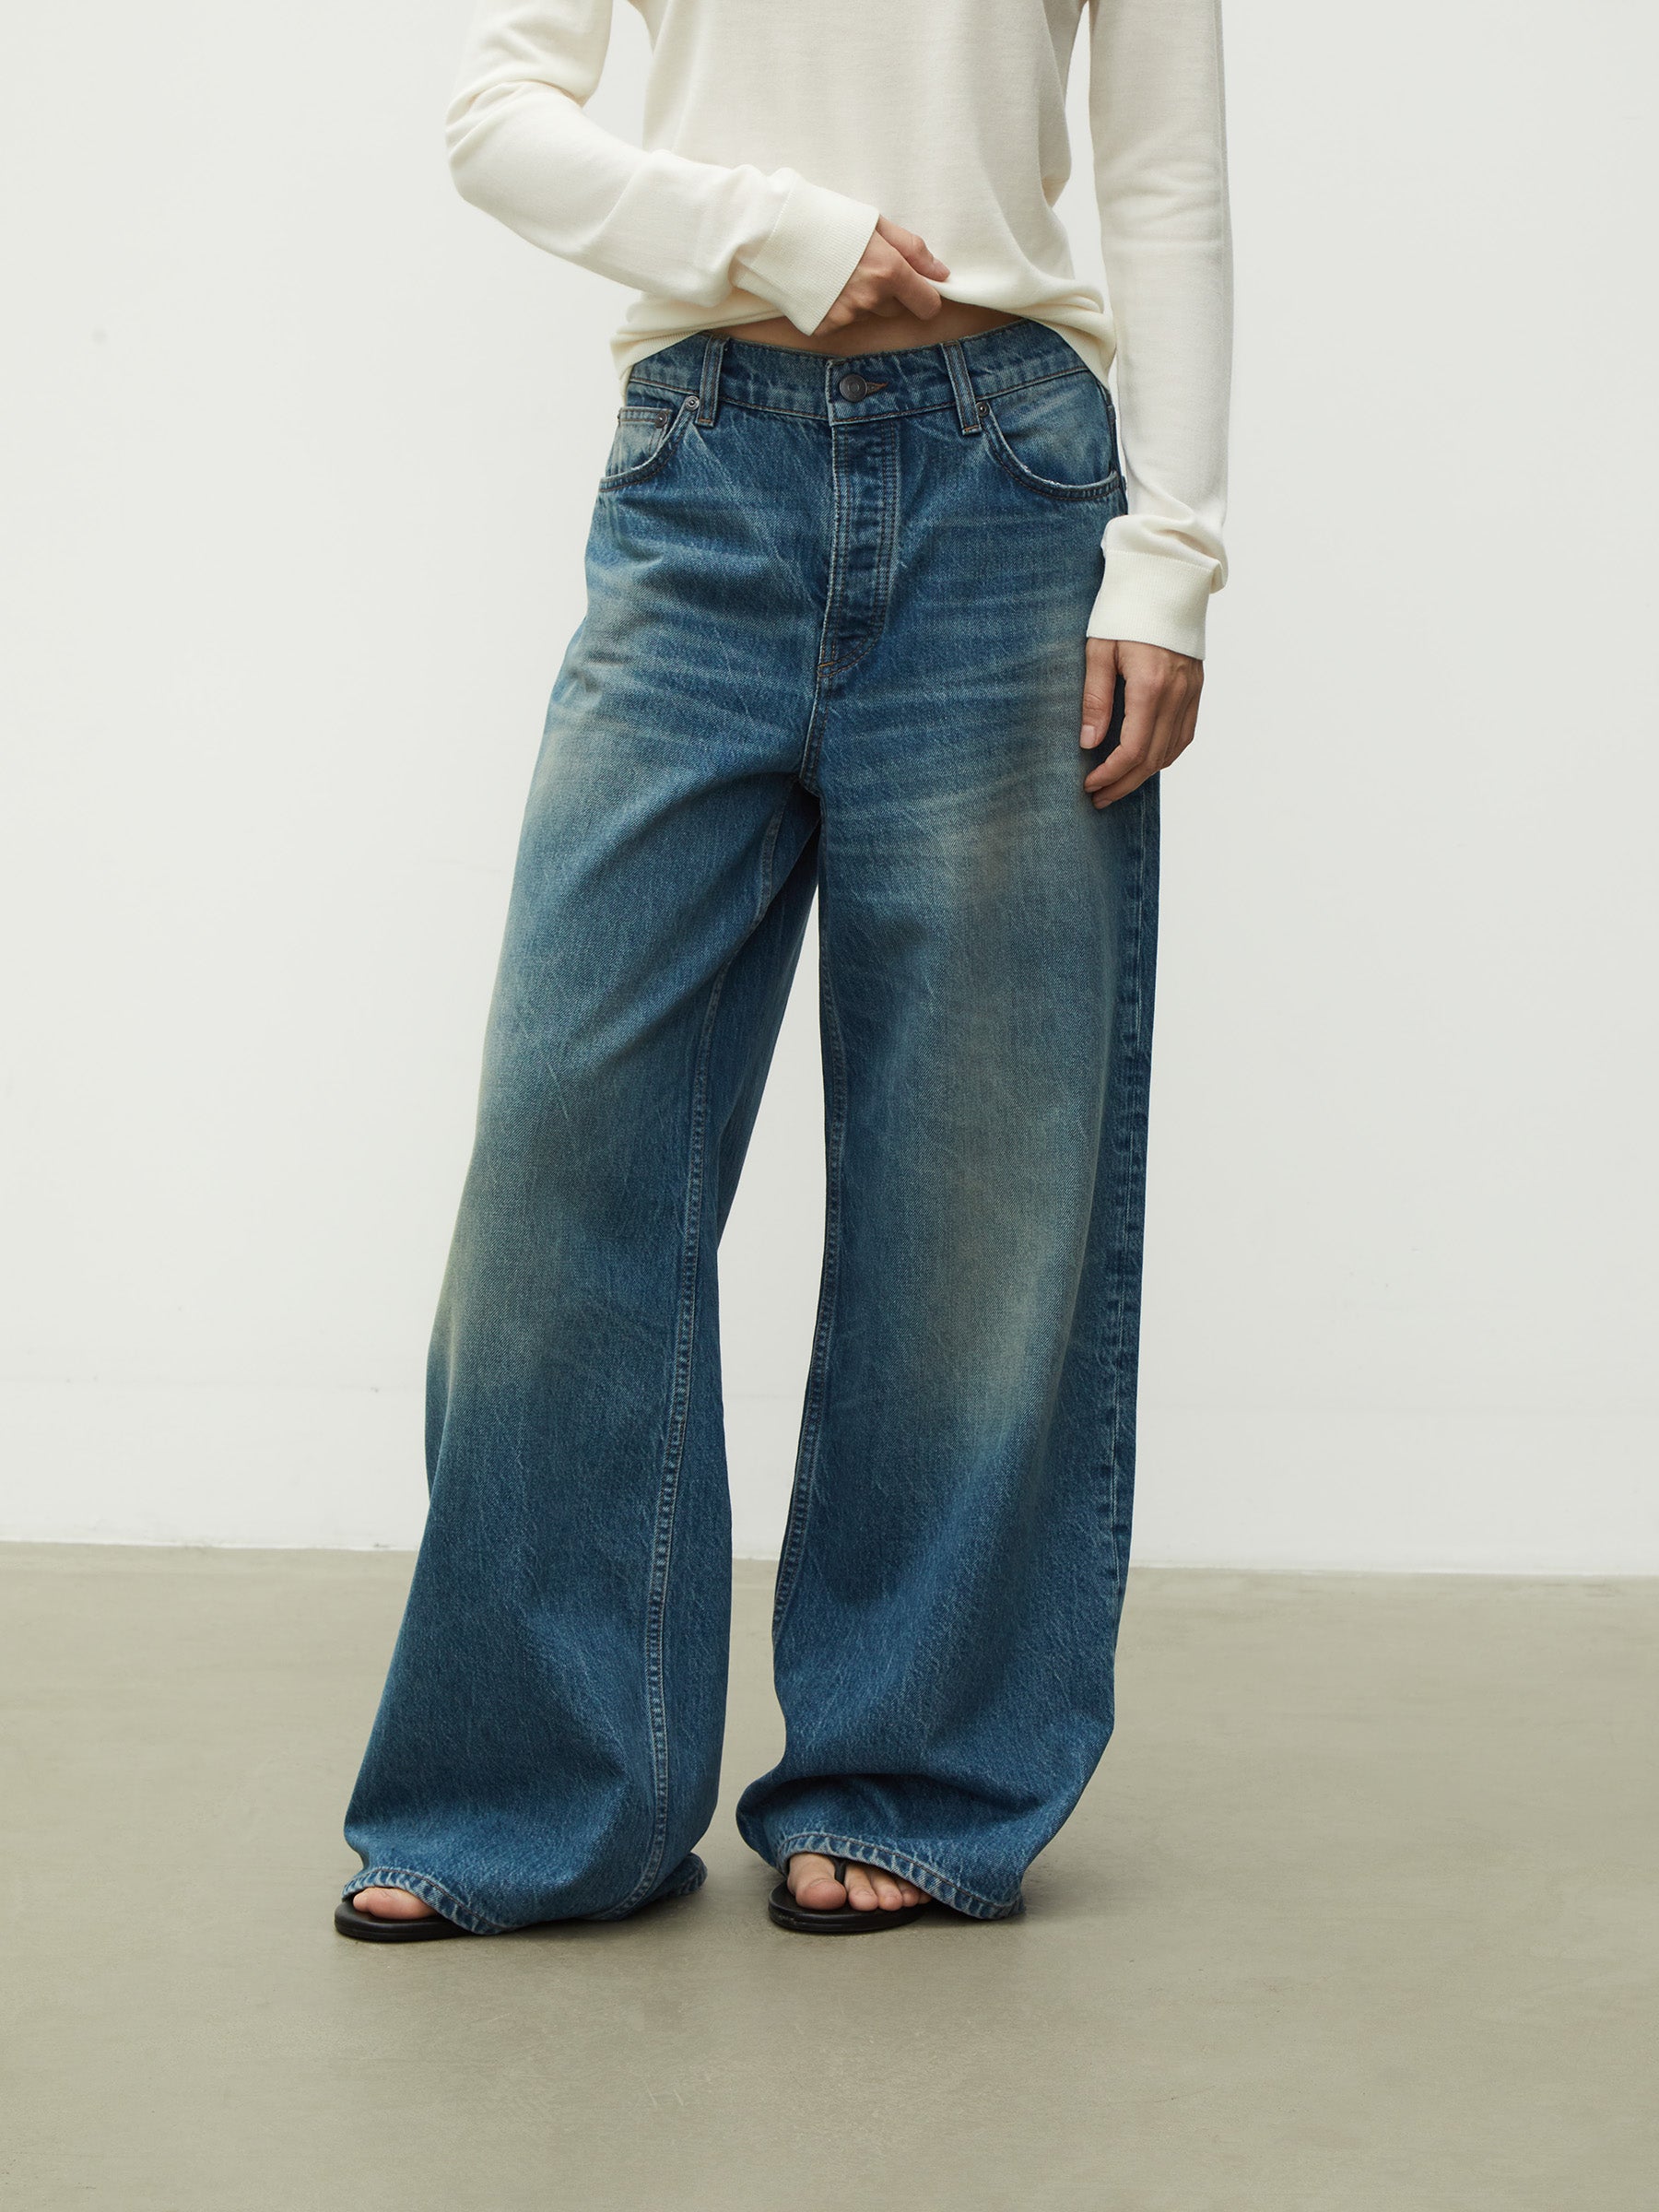 Wide leg Candiani jeans 431